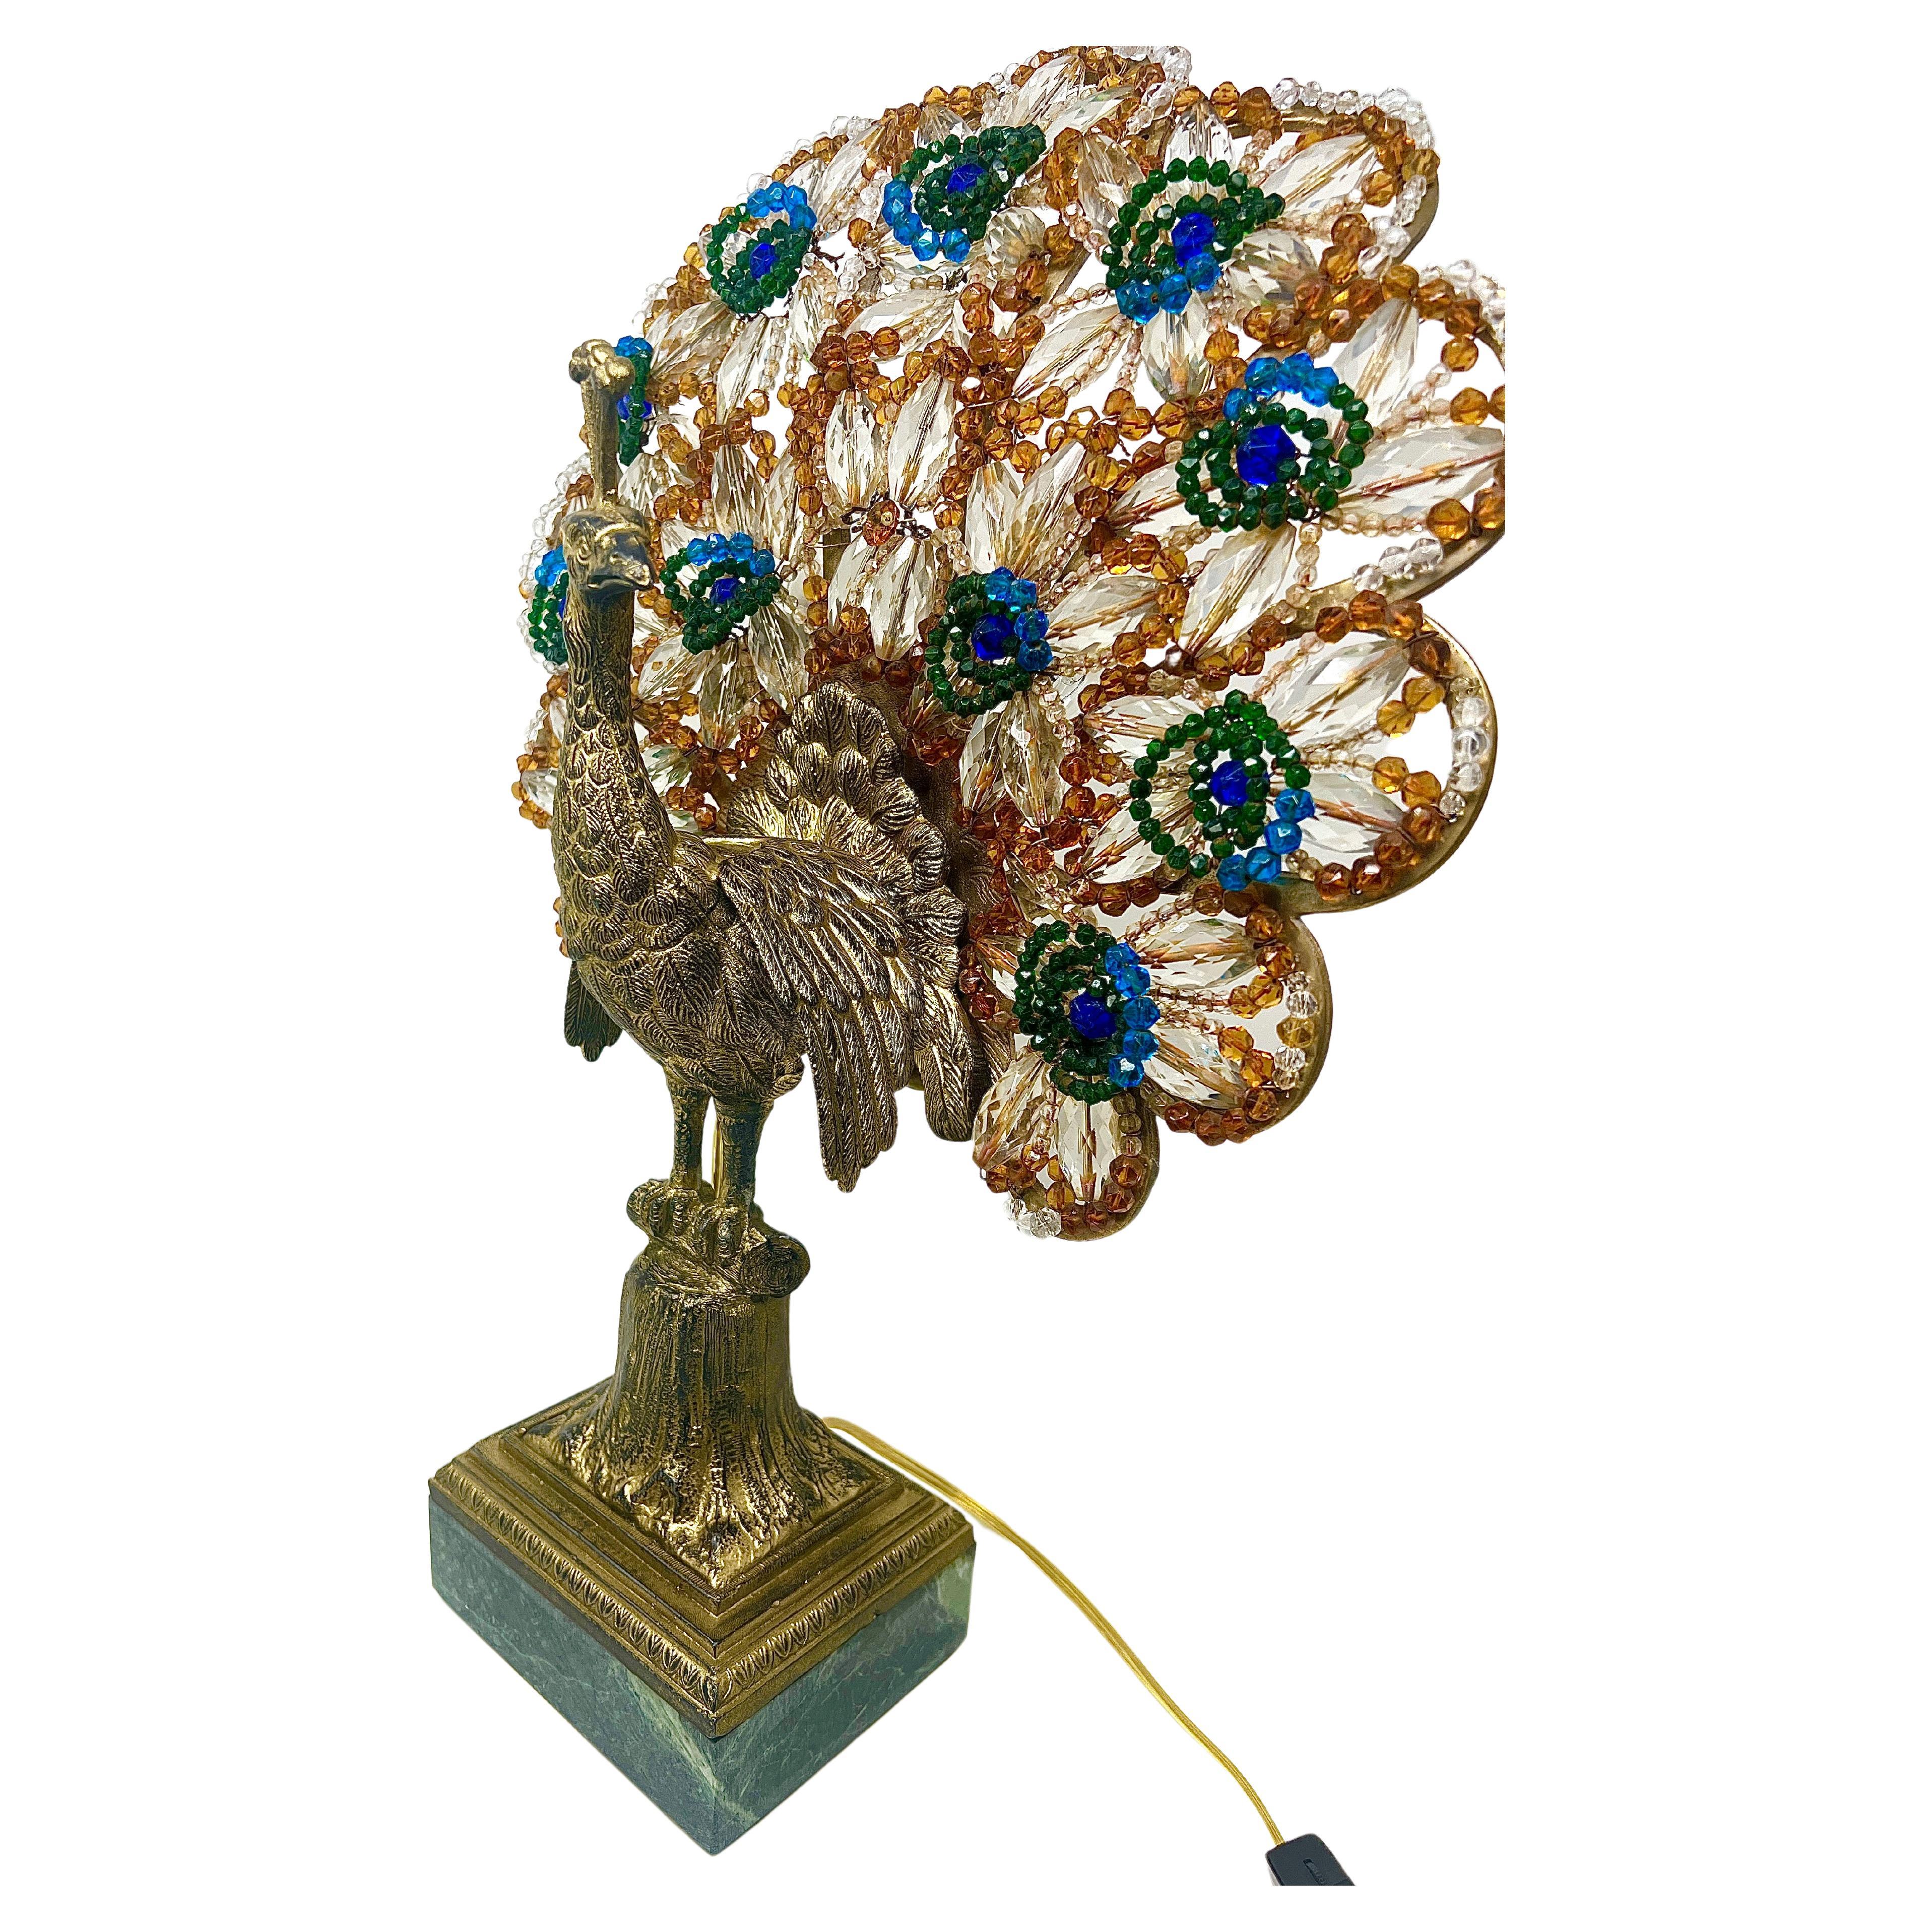 Antique French Art Nouveau Gold Bronze and Czechoslovakian Crystal Beaded Peacock Lamp on Green Marble Base, Circa 1915-1920's.
